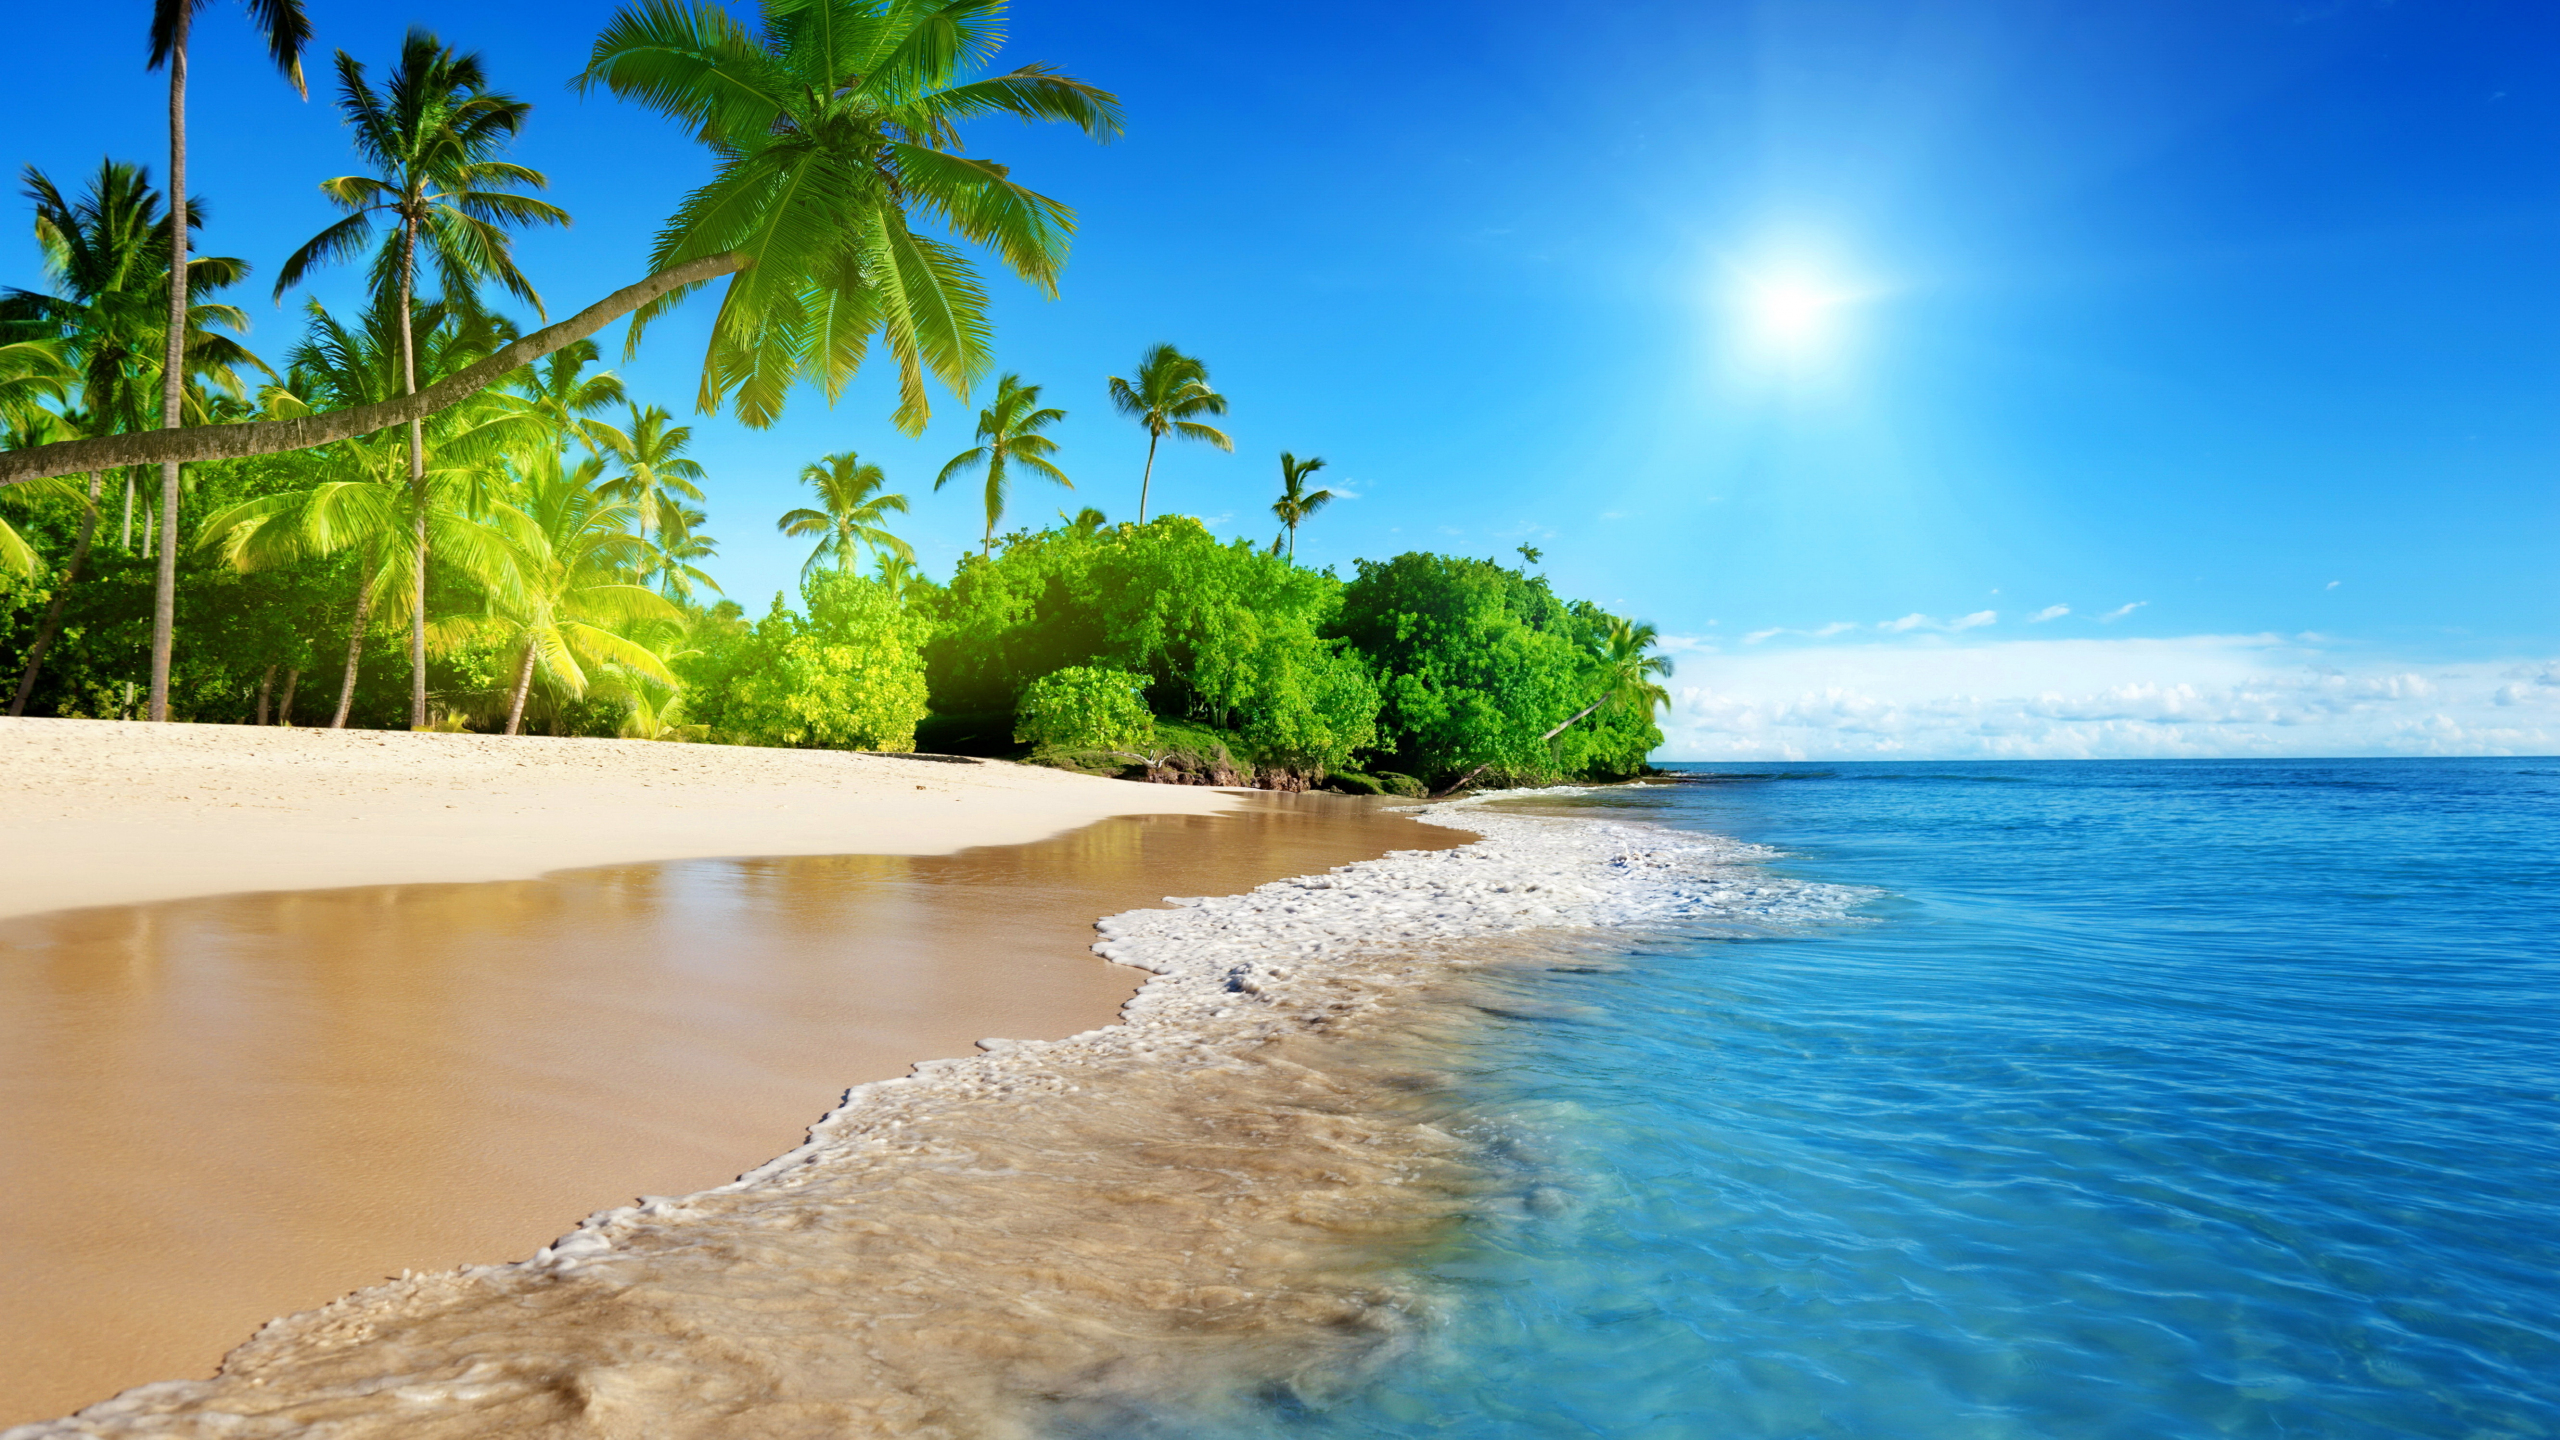 2560x1440 Landscape Beach Tropical Sun 1440P Resolution HD 4k Wallpapers  Images Backgrounds Photos and Pictures